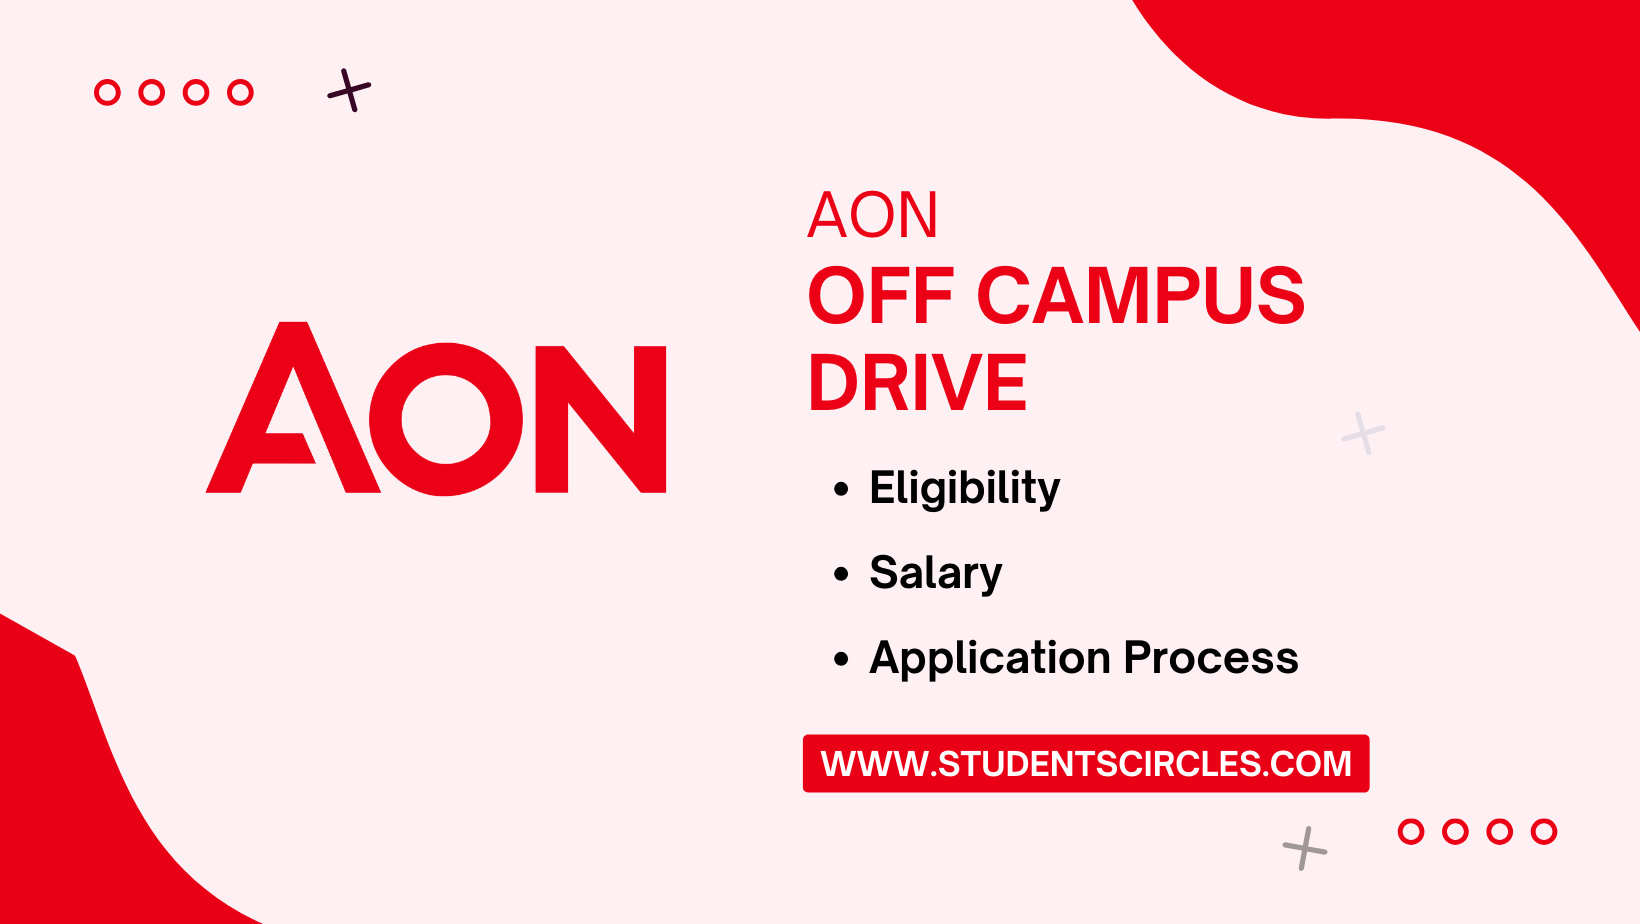 AON Off Campus Drive